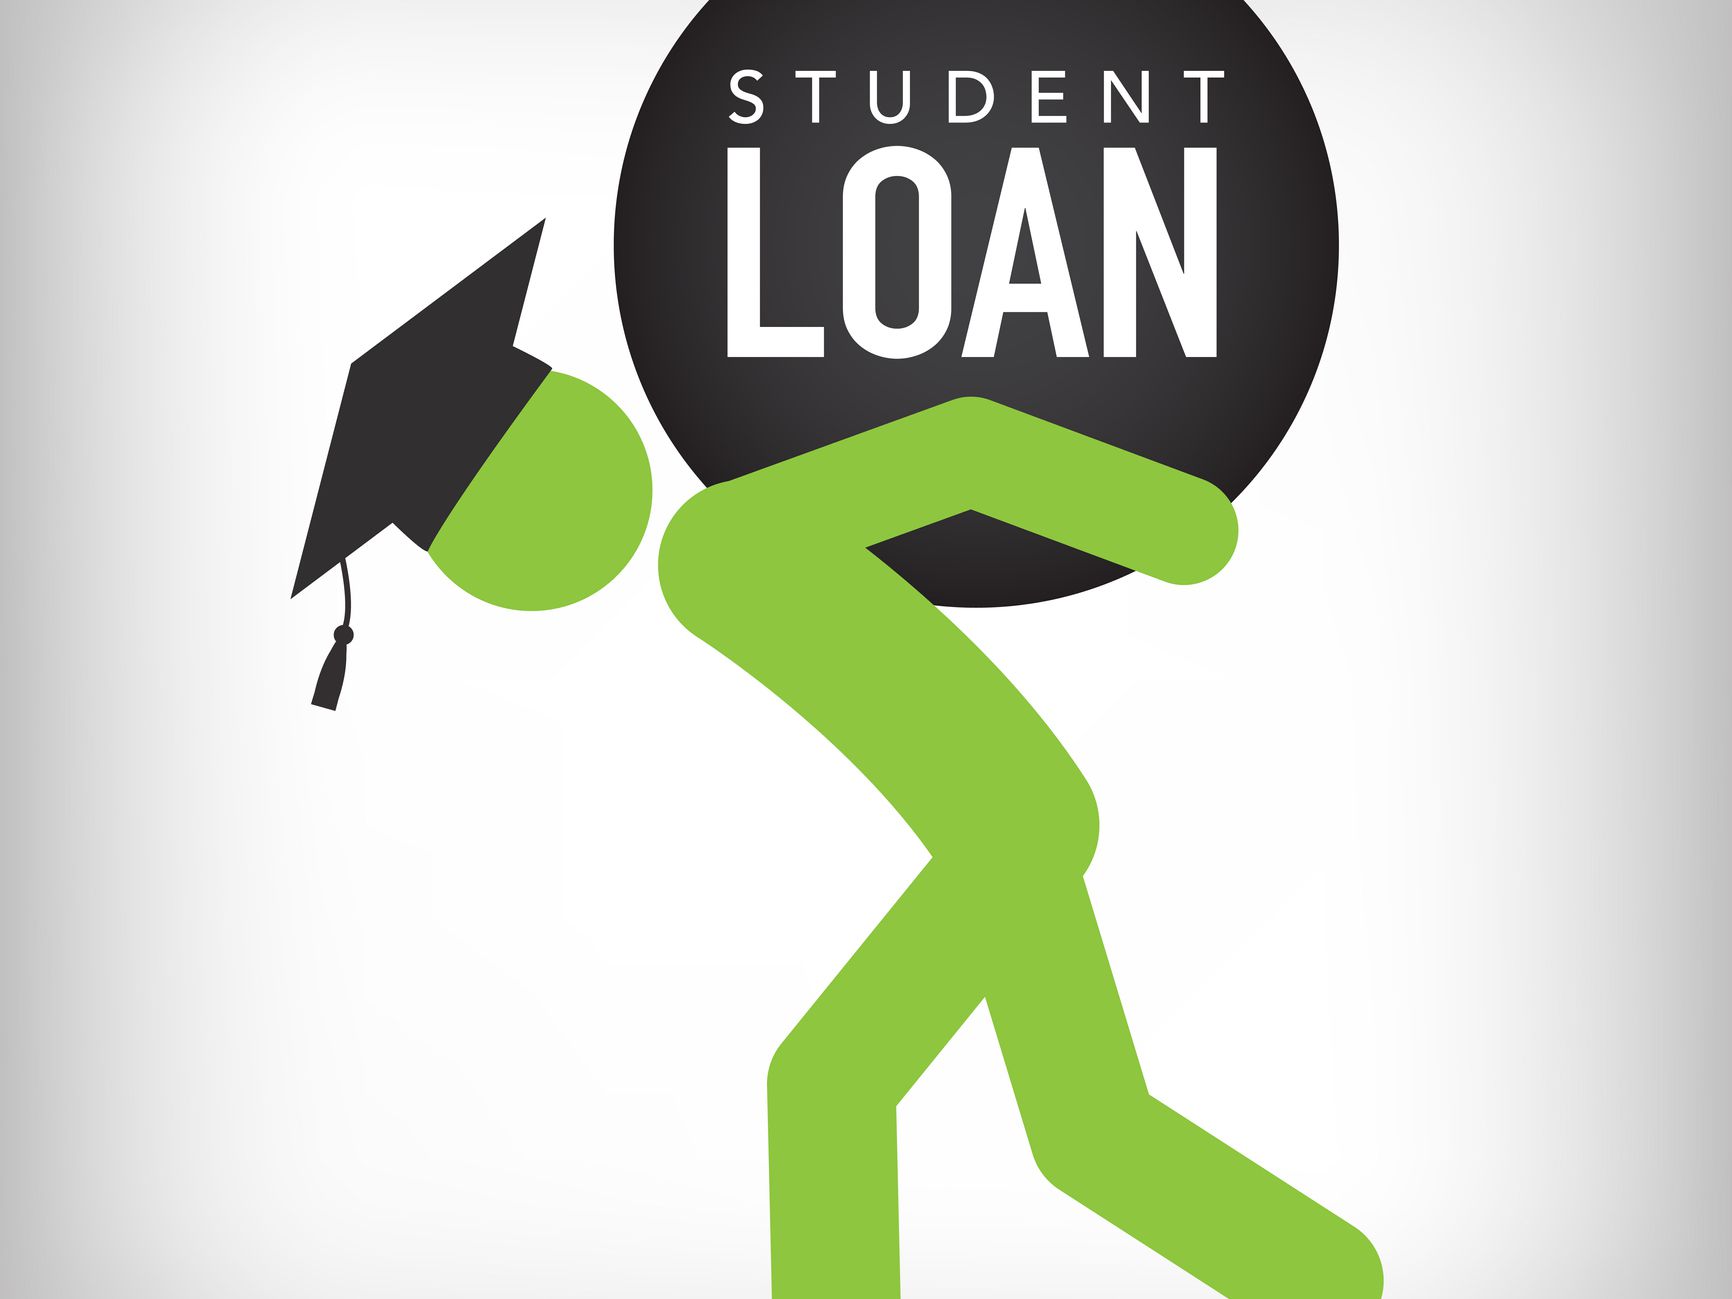 history's greatest scams - student loans - Student Loan